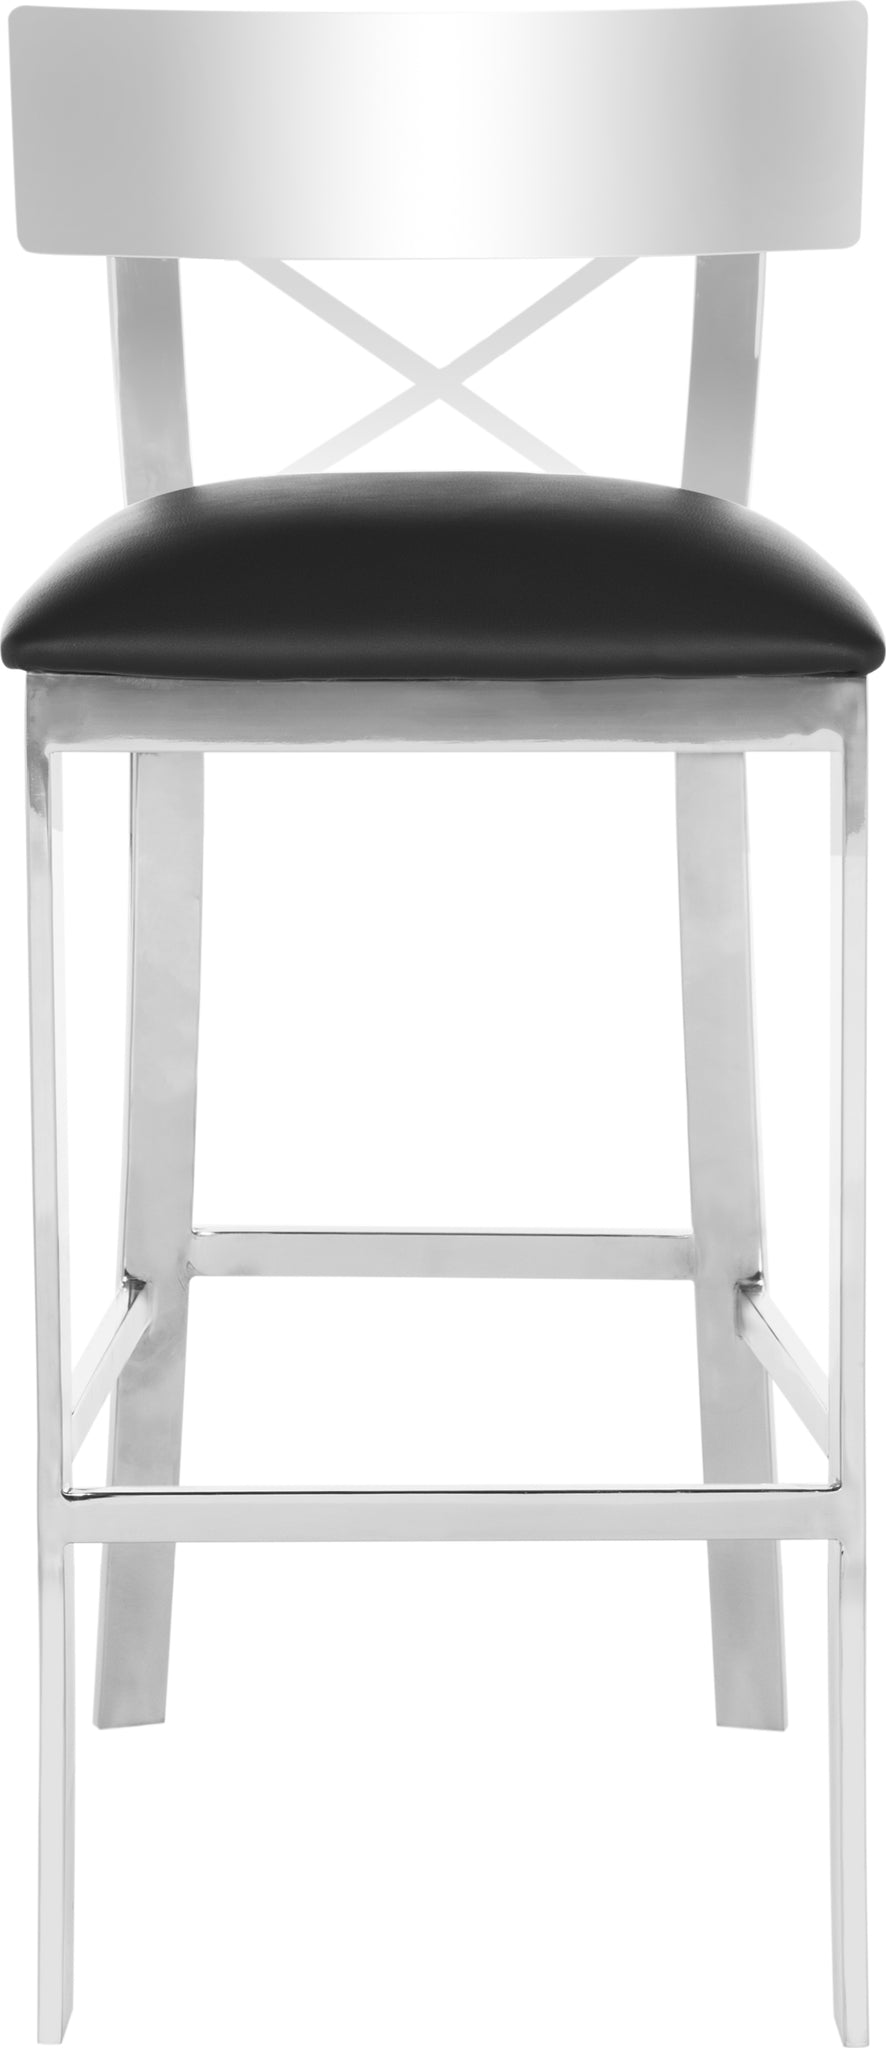 Safavieh Zoey 39''H Stainless Steel Cross Back Bar Stool Black and Chrome Furniture main image